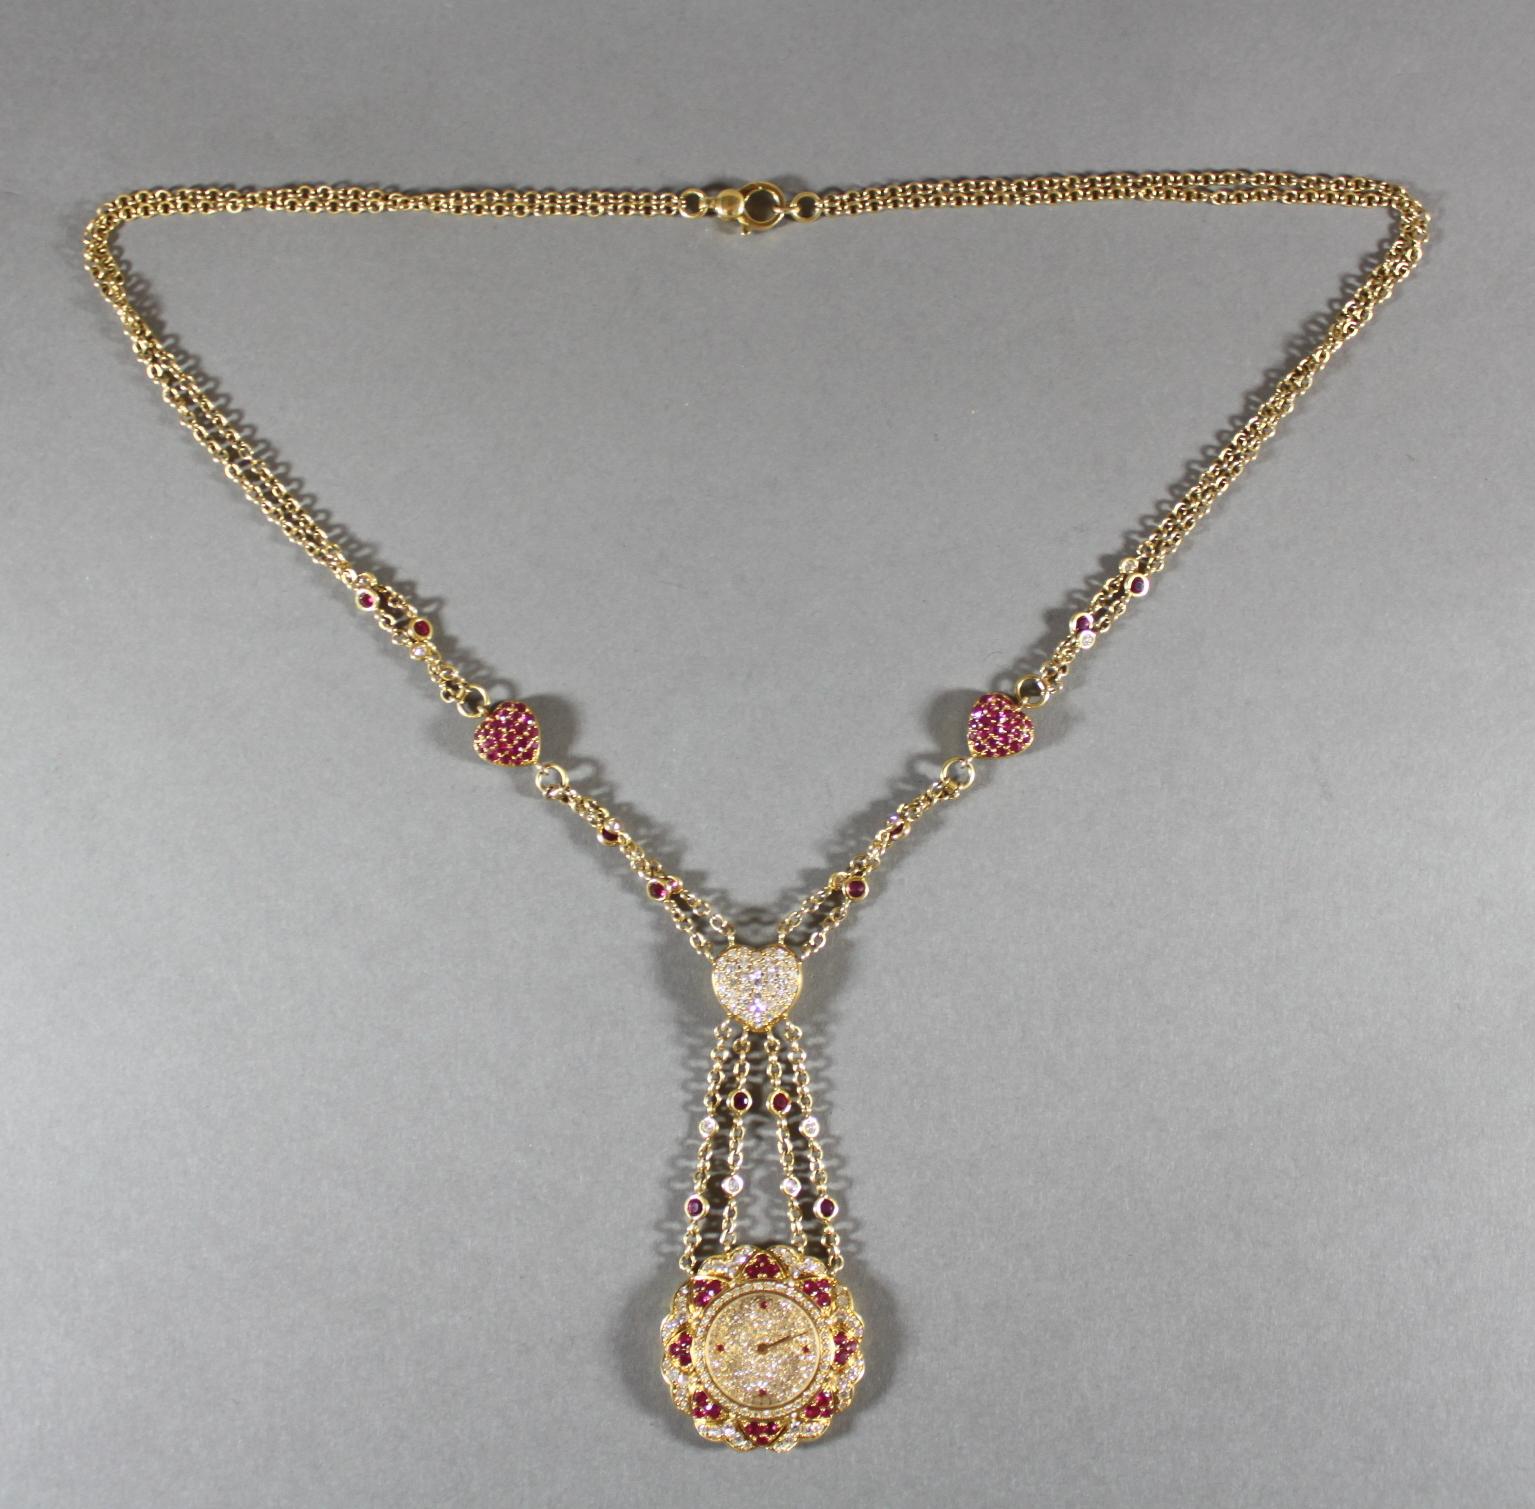 Moussaieff 18k gold ladies necklace pendant watch with diamonds and rubies.
Made in Israel / Switzerland Circa 2000's

Dimensions - 
Necklace Length x Width : 65.5 x 0.6 cm
Watch Diameter x Width : 3.6 x 0.8 cm
Weight : 85 grams

Gender: